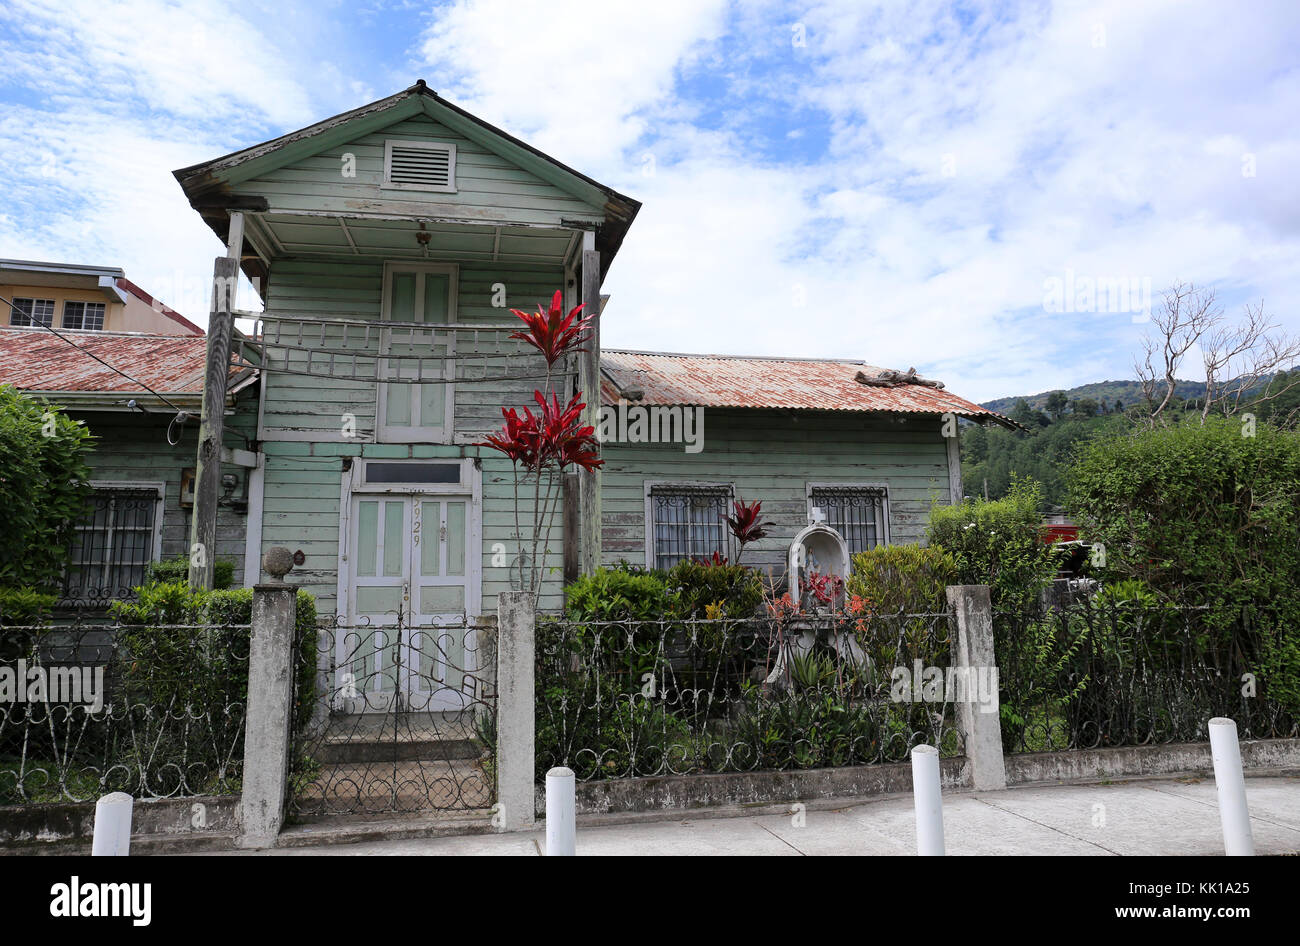 Typical House in Boquete, Panama, July 2015 Stock Photo